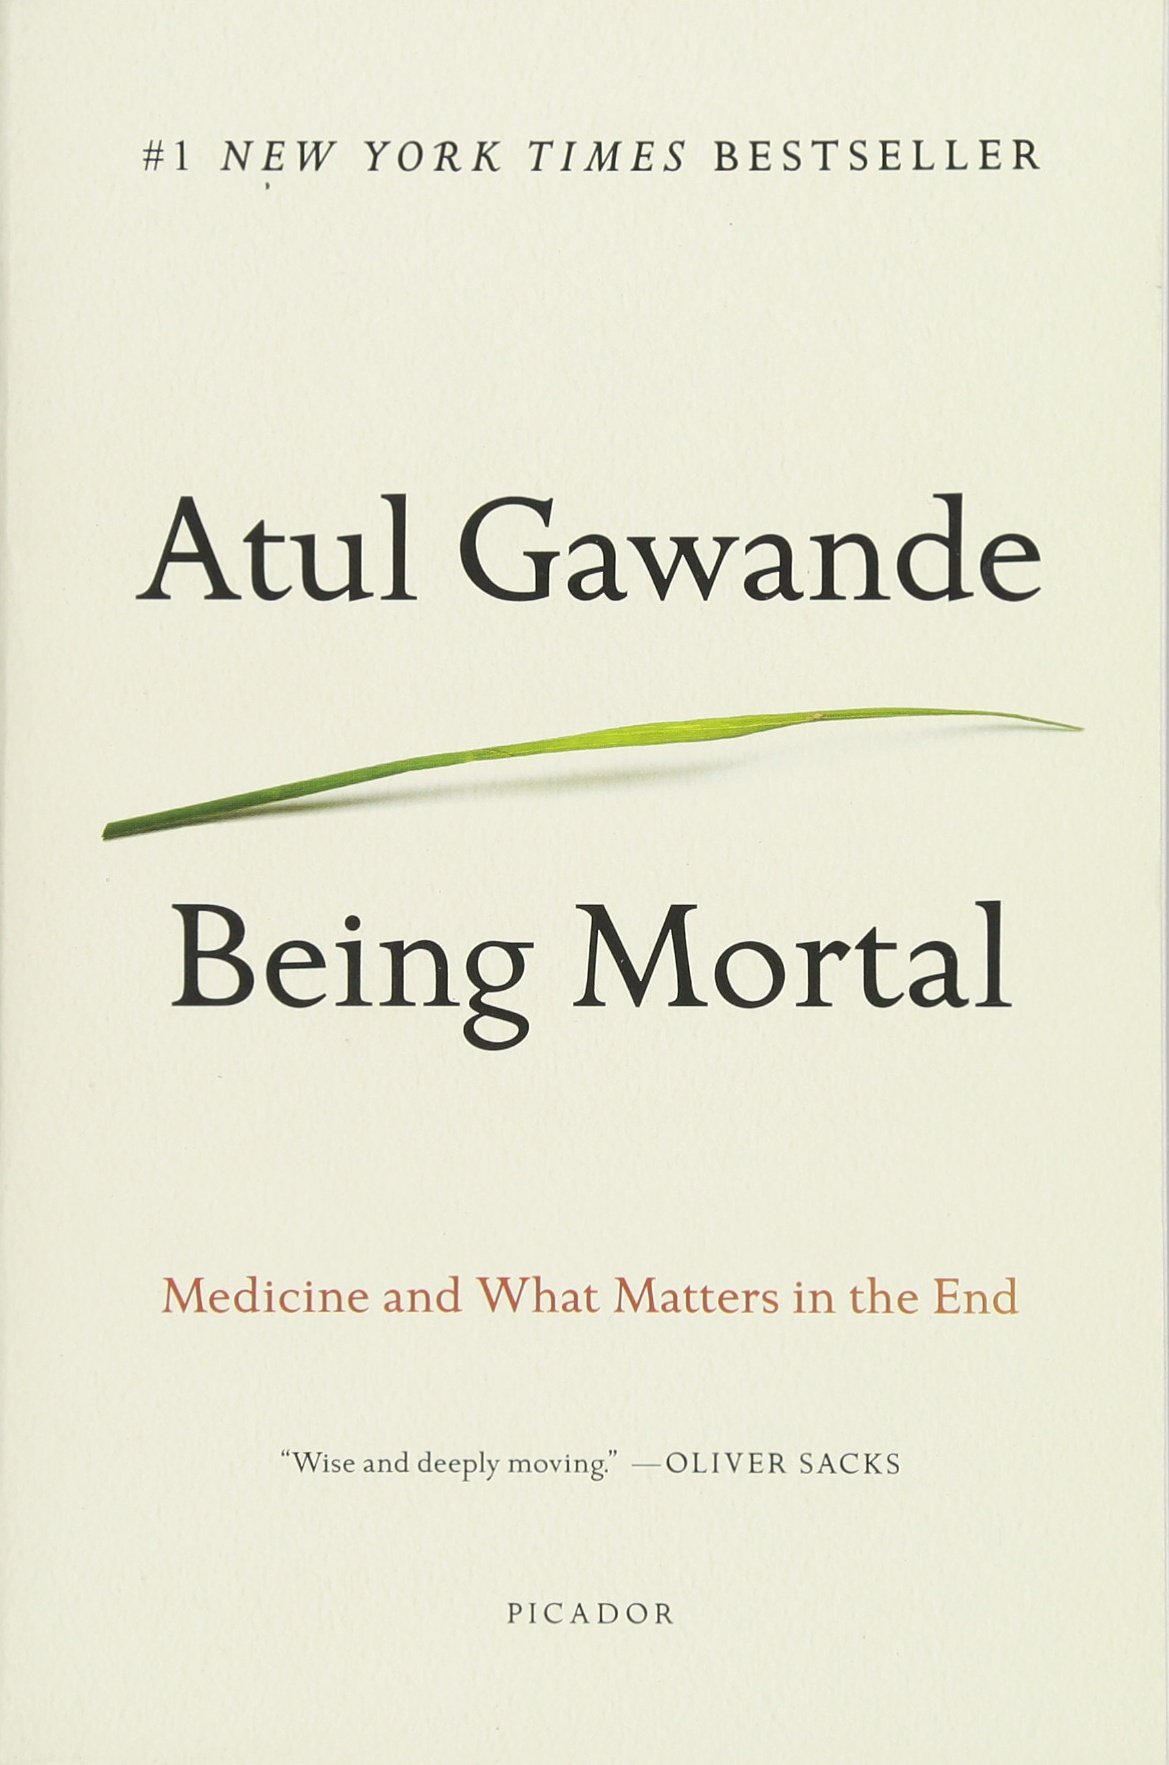 The book cover for Being Mortal.